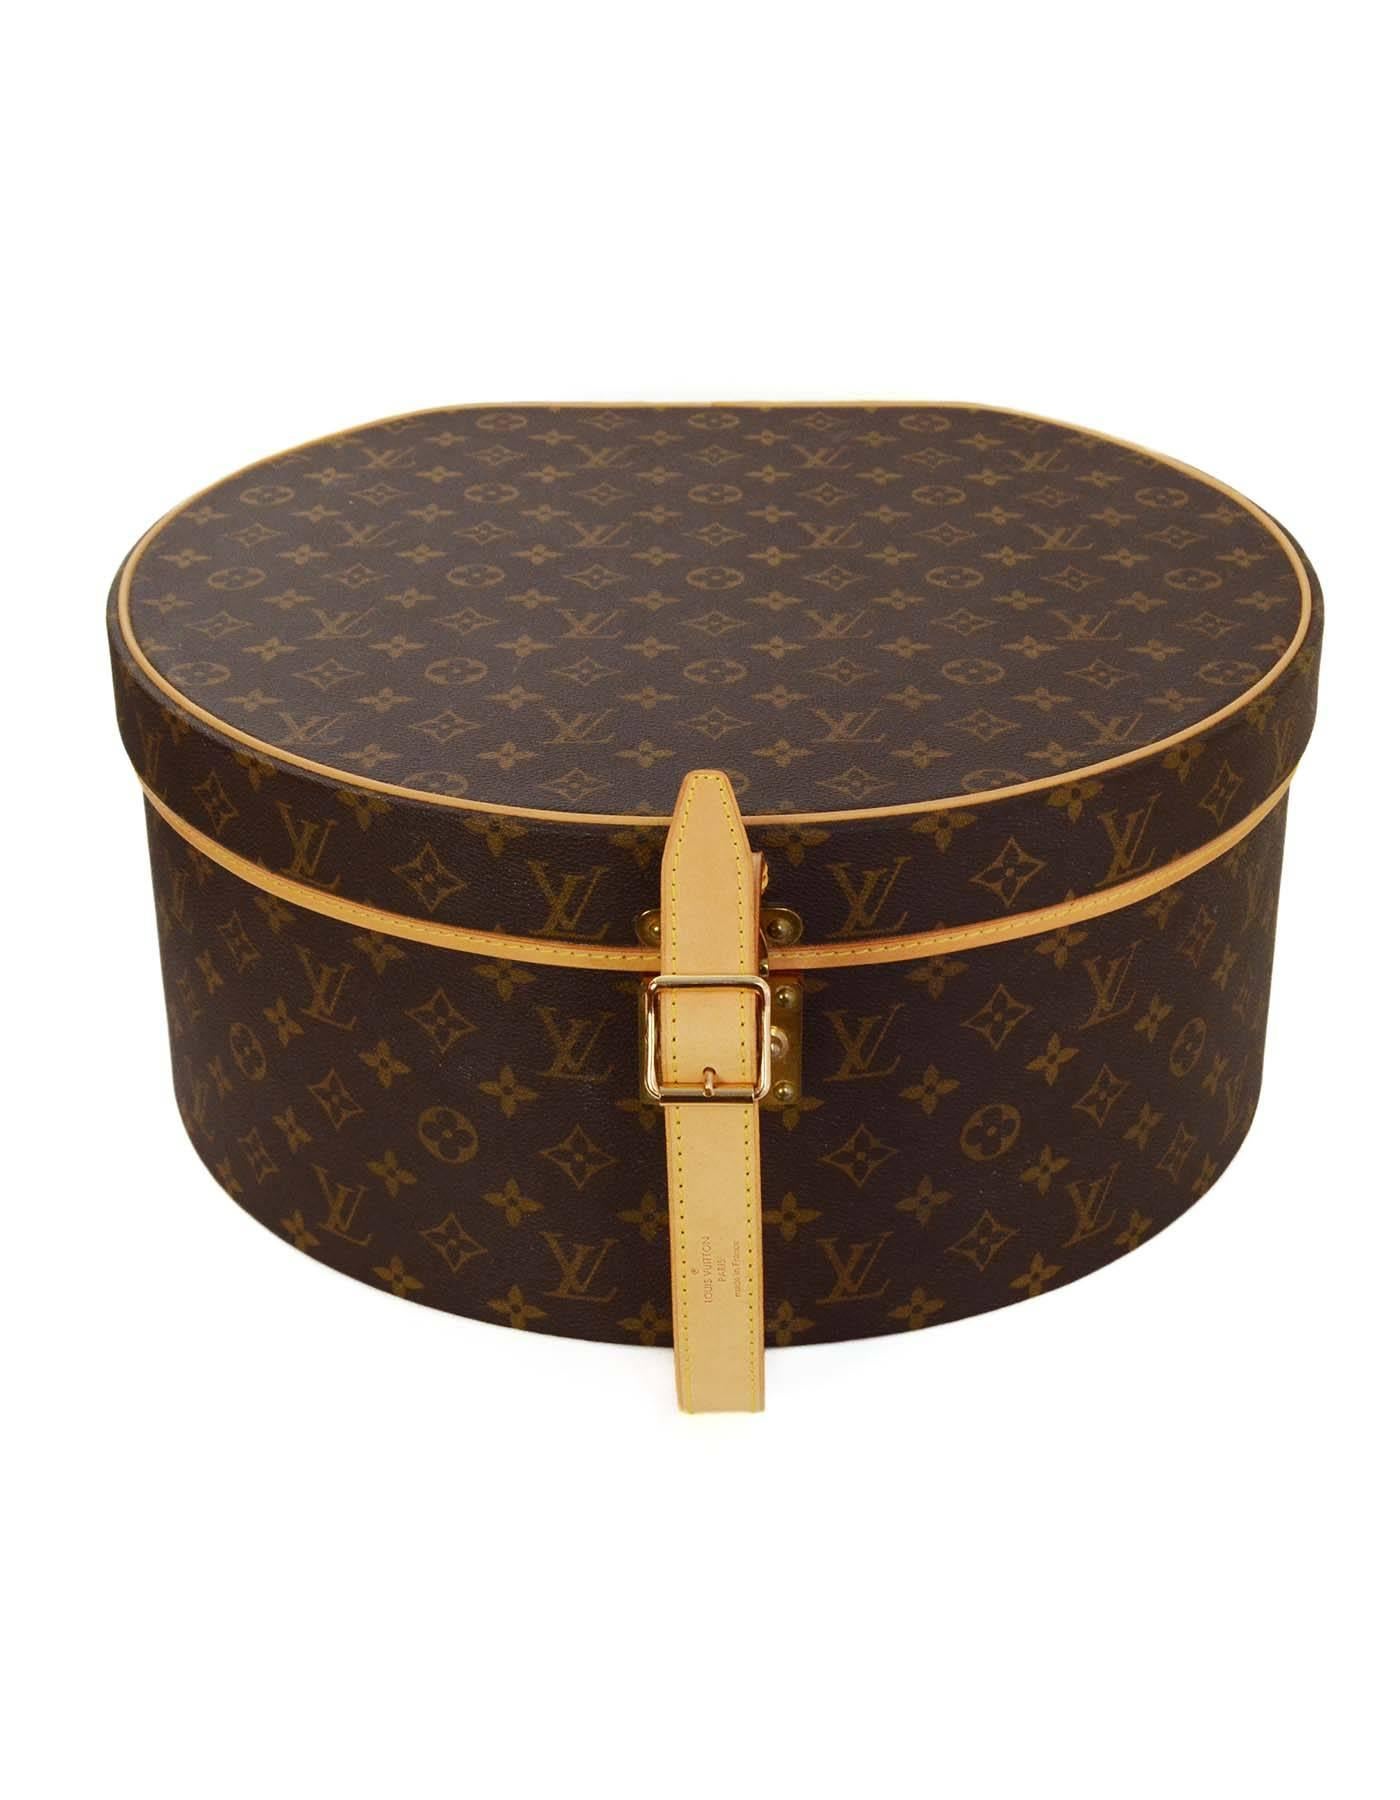 Louis Vuitton Monogram 40cm Boite Chapeaux Ronde Hat Box 
Features leather handle/strap and leather piping throughout
Made In: France
Year of Production: 2007
Color: Brown and tan
Hardware: Goldtone
Materials: Coated canvas and